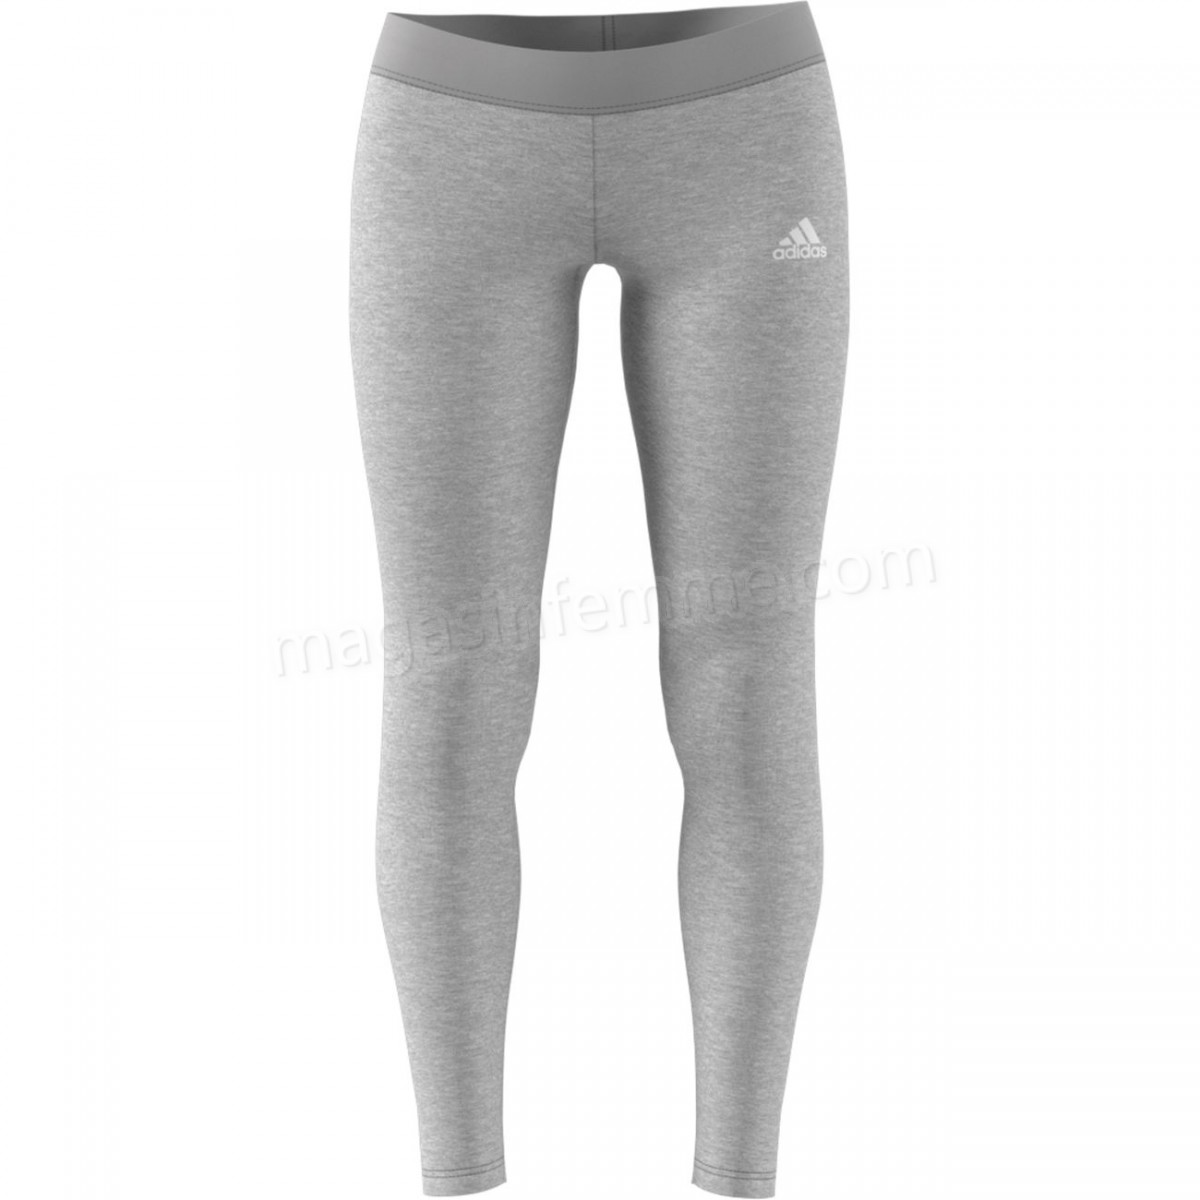 Adidas-Fitness femme ADIDAS Collant femme adidas Must Haves 3-Stripes en solde - -11